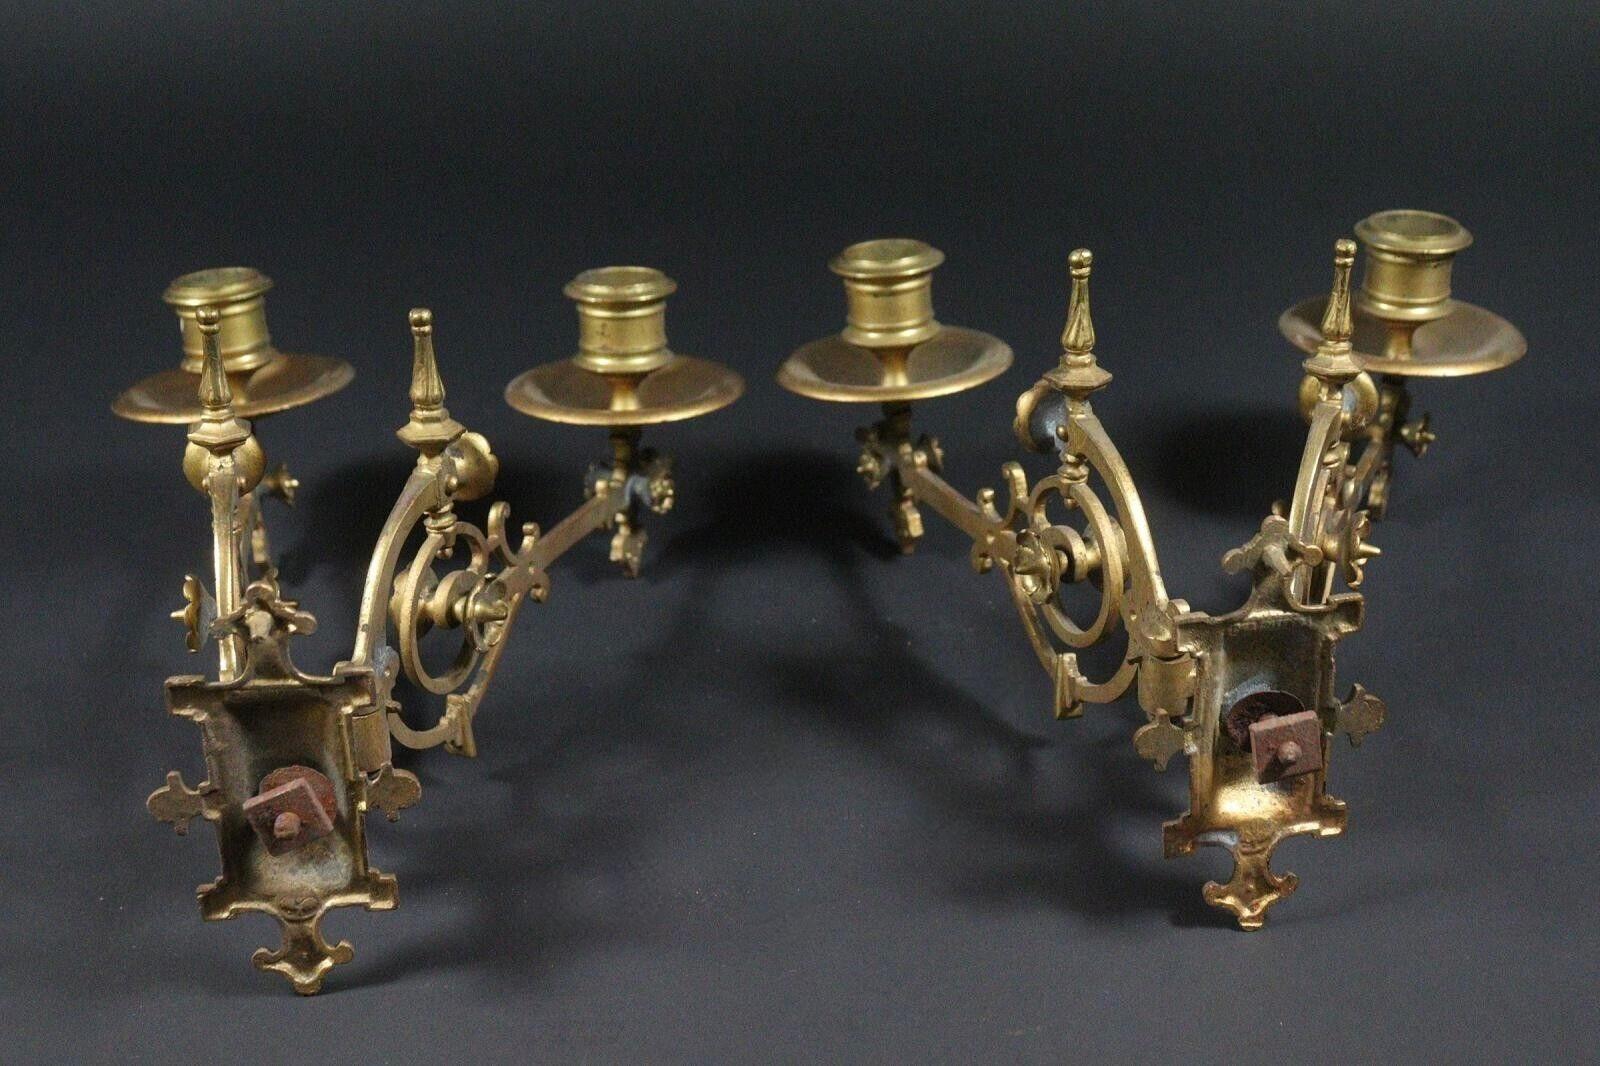 Two Original Bronze Art Nouveau Candle Sconce for a Piano or Wall Germany, 1890s For Sale 8